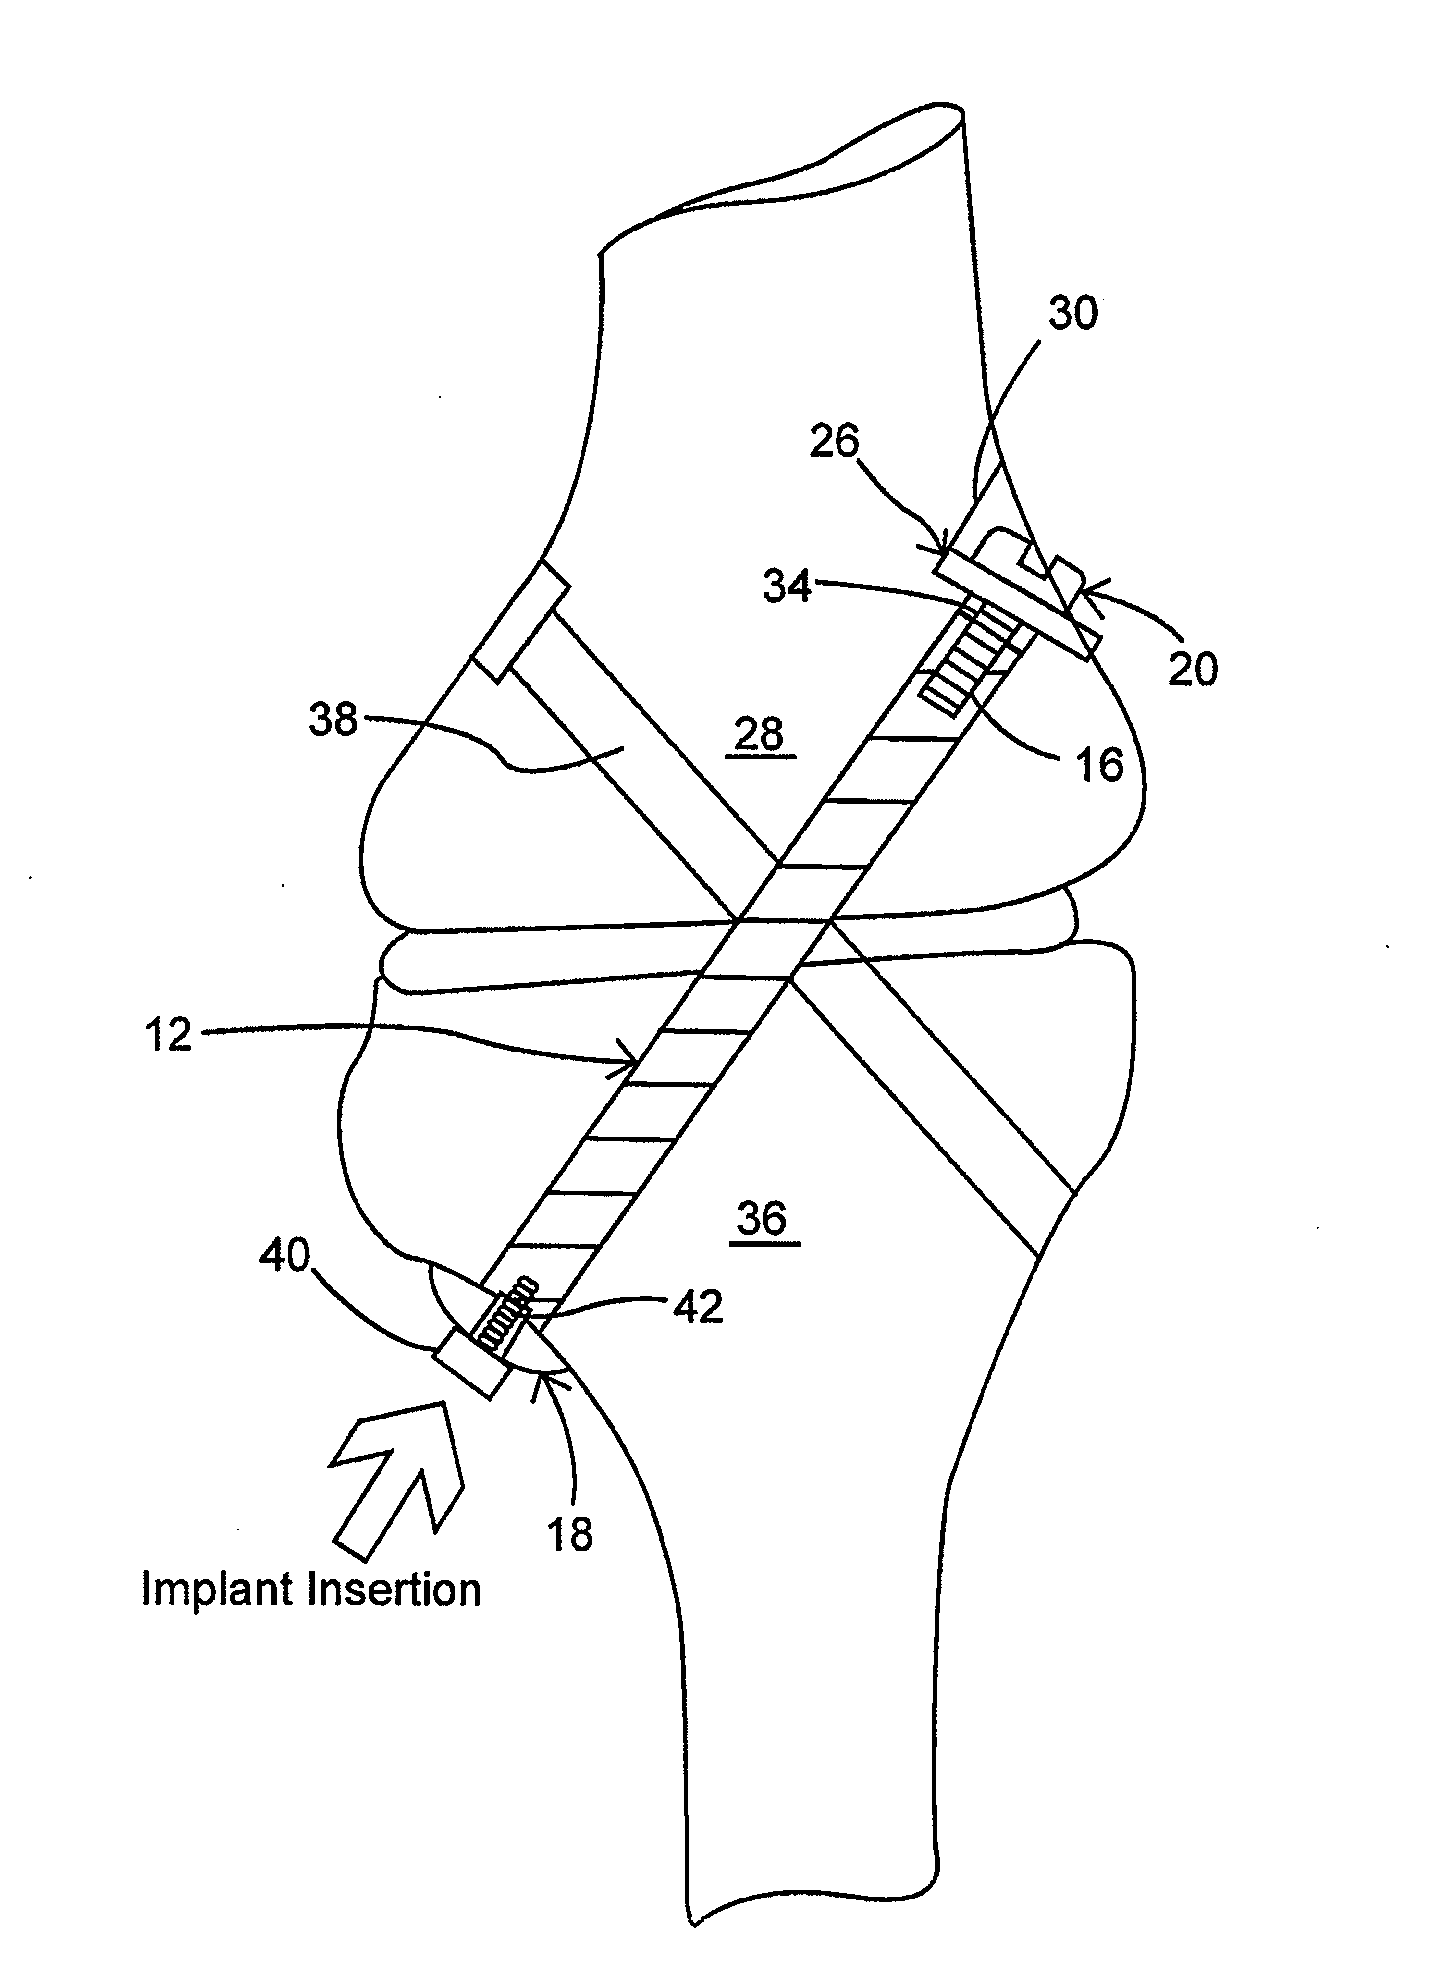 Orthopedic implant having non-circular cross section and method of use thereof